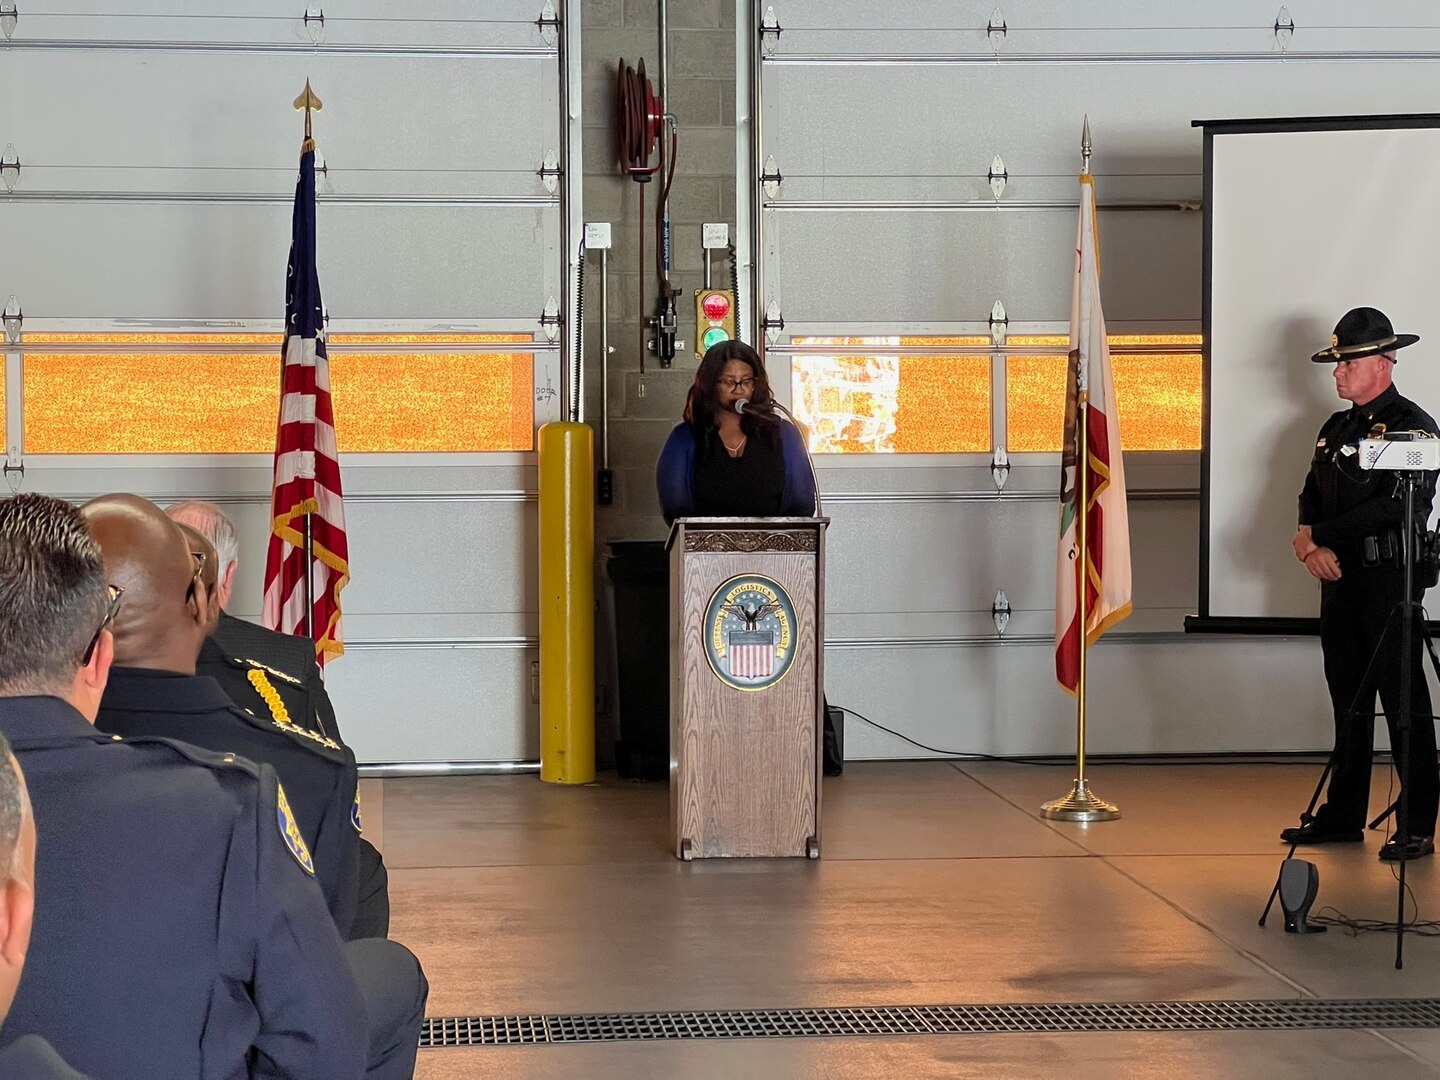 DLA Installation Management at San Joaquin Family Advocacy Program manager Sharon Stewart served as the keynote speaker at the Peace Officers’ Memorial Observance ceremony held at DLA San Joaquin’s Public Safety Center May 17.